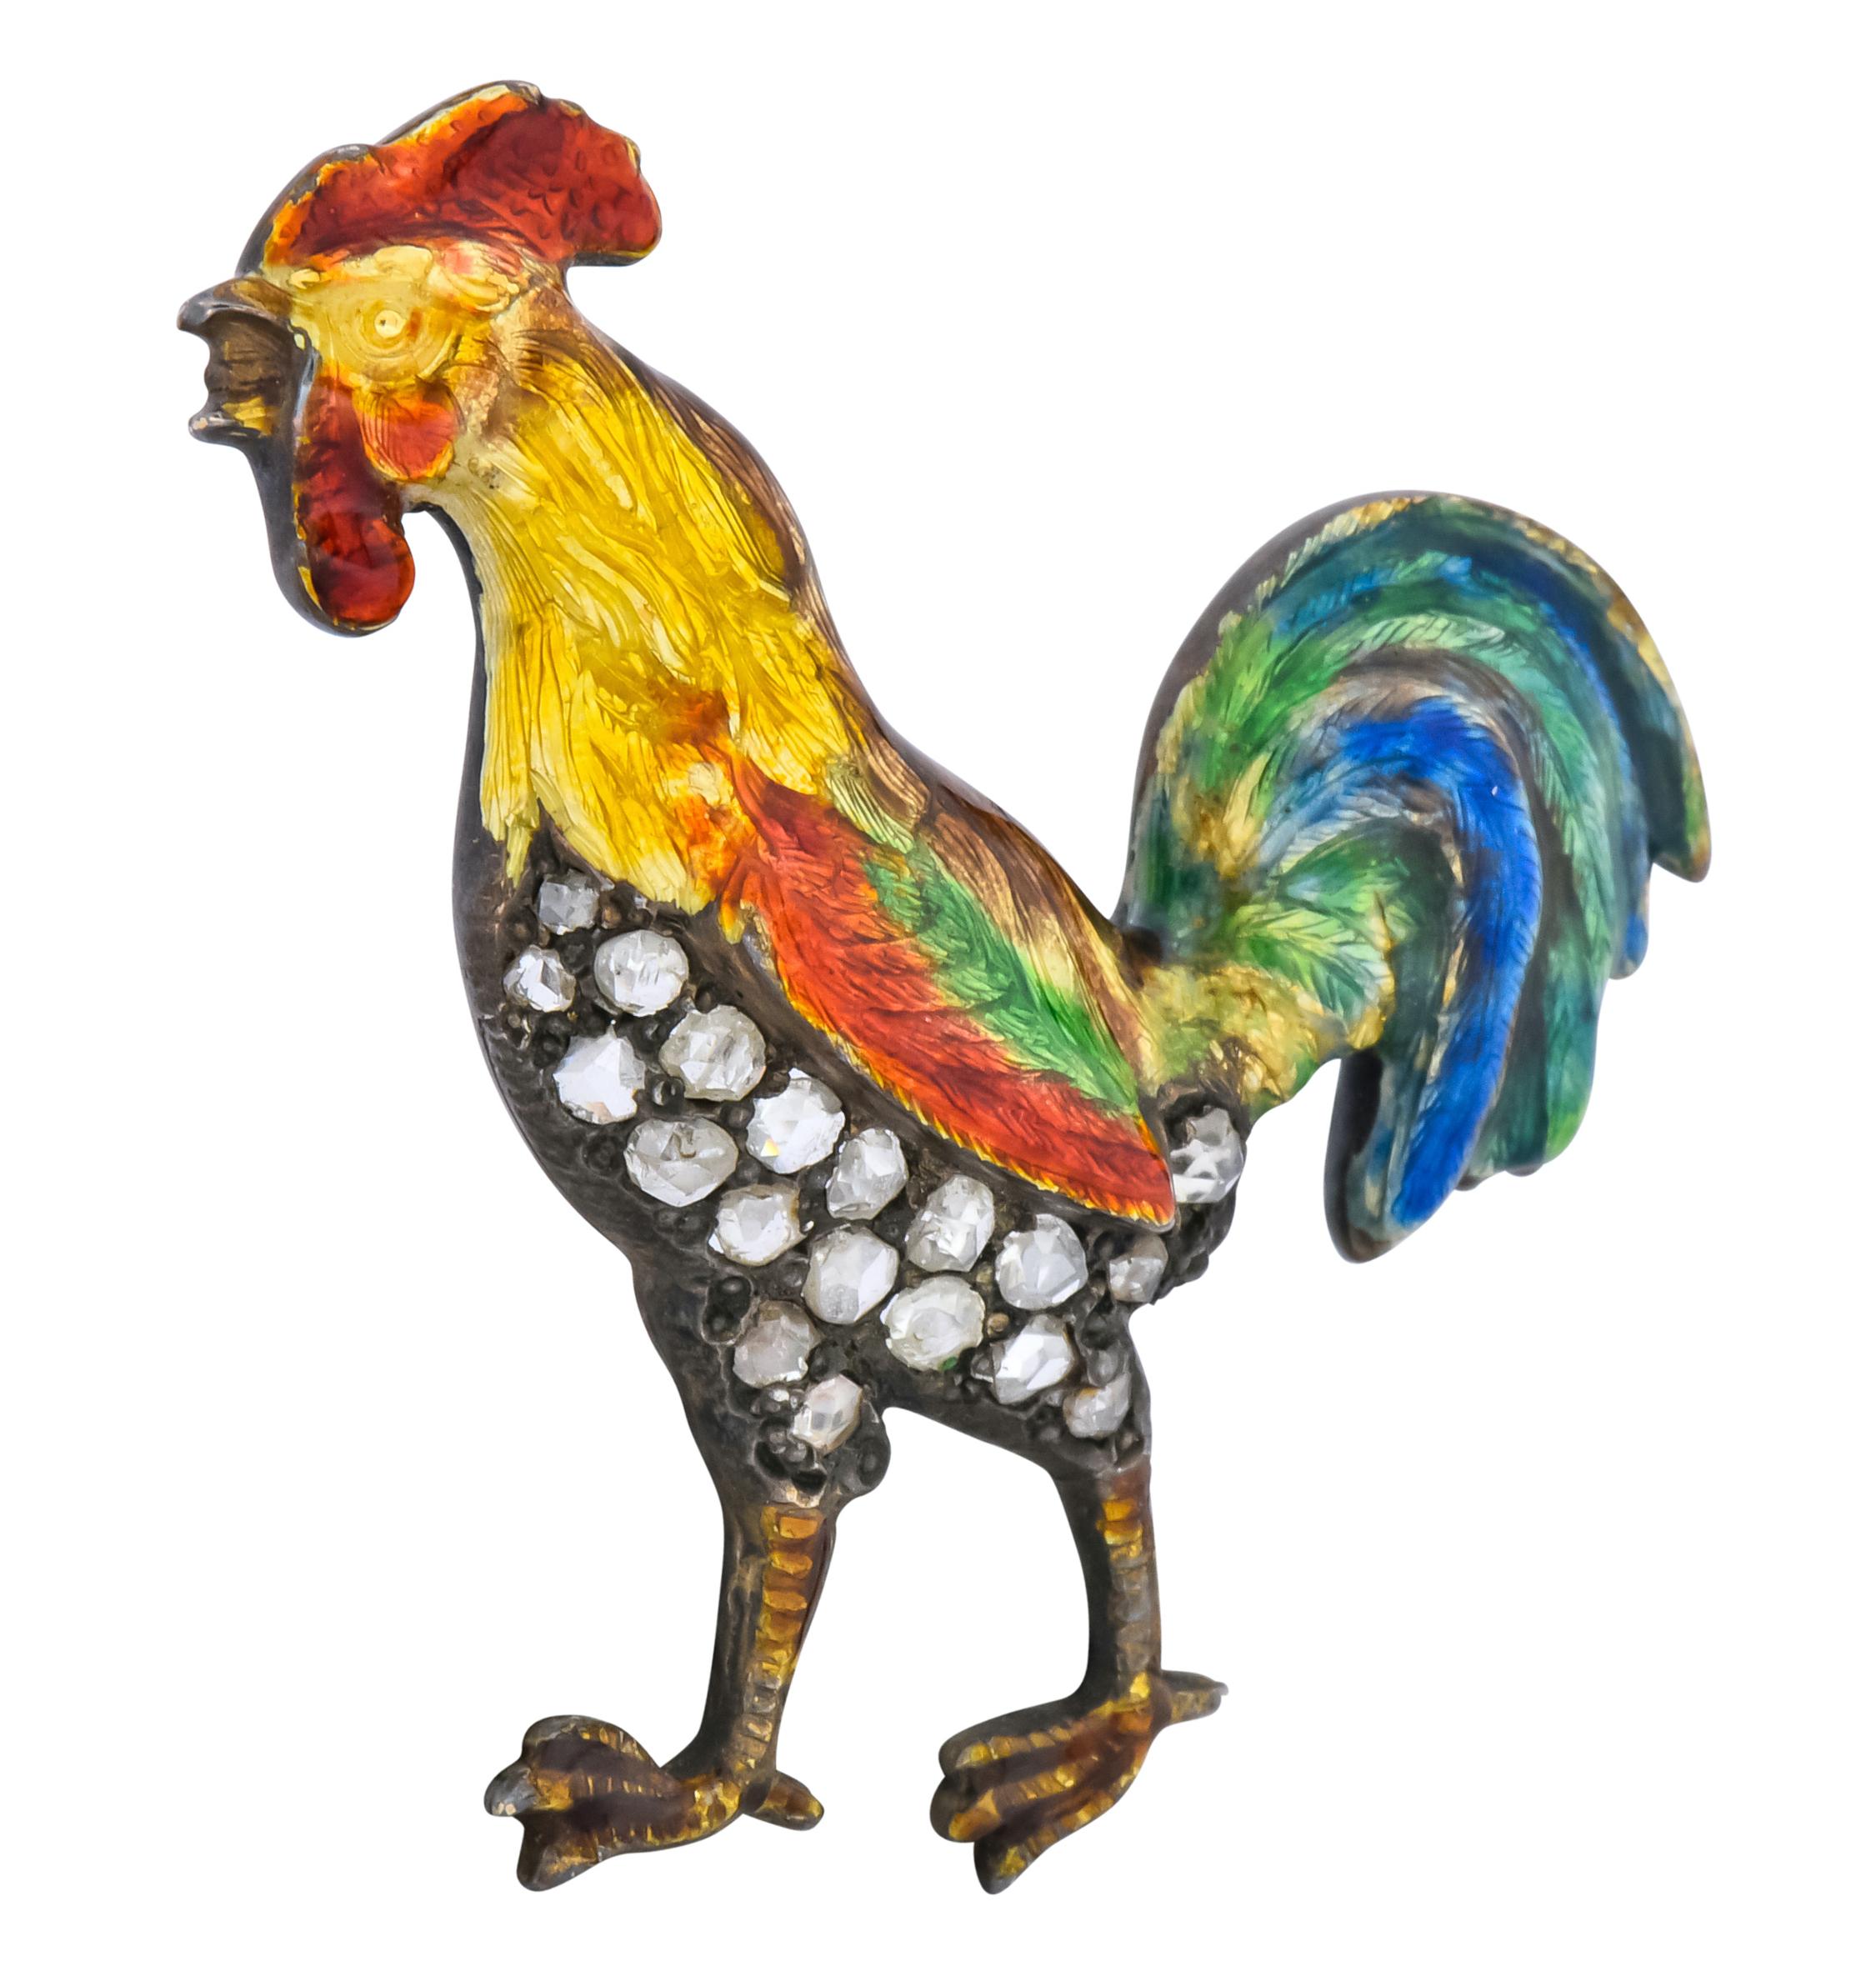 Brooch designed as a rooster with large voluminous tail feathers

Glossed with red, yellow, green, and blue enamel, little to no loss, consistent with age, wear, and use

Abdomen is accented with rose cut diamonds weighing approximately 0.45 carat